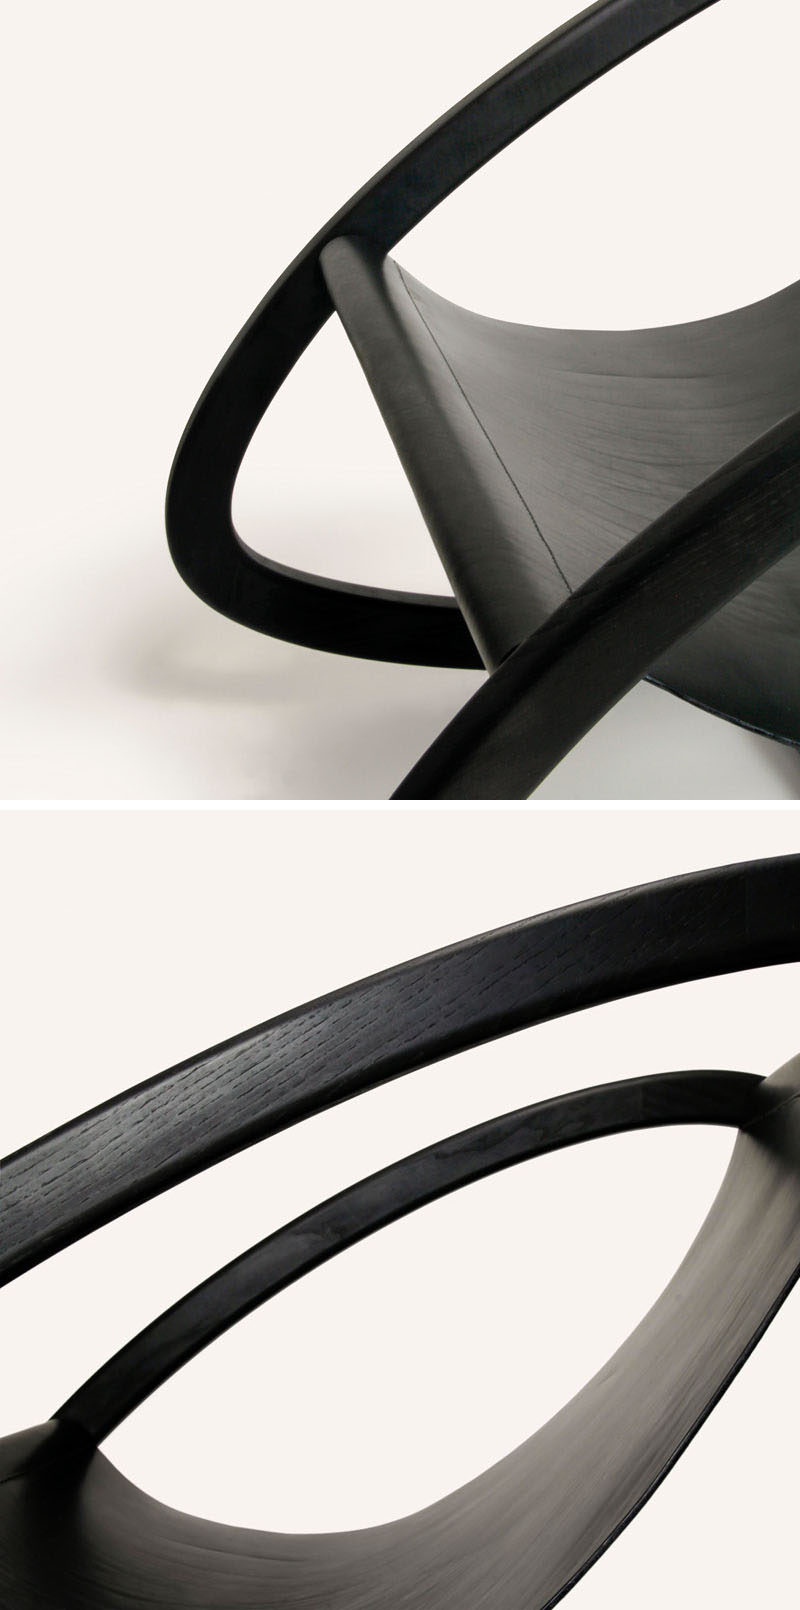 Design studio Objects & Ideas have crafted a modern wood and leather rocking chair named 'Wye'. #RockingChair #ModernFurniture